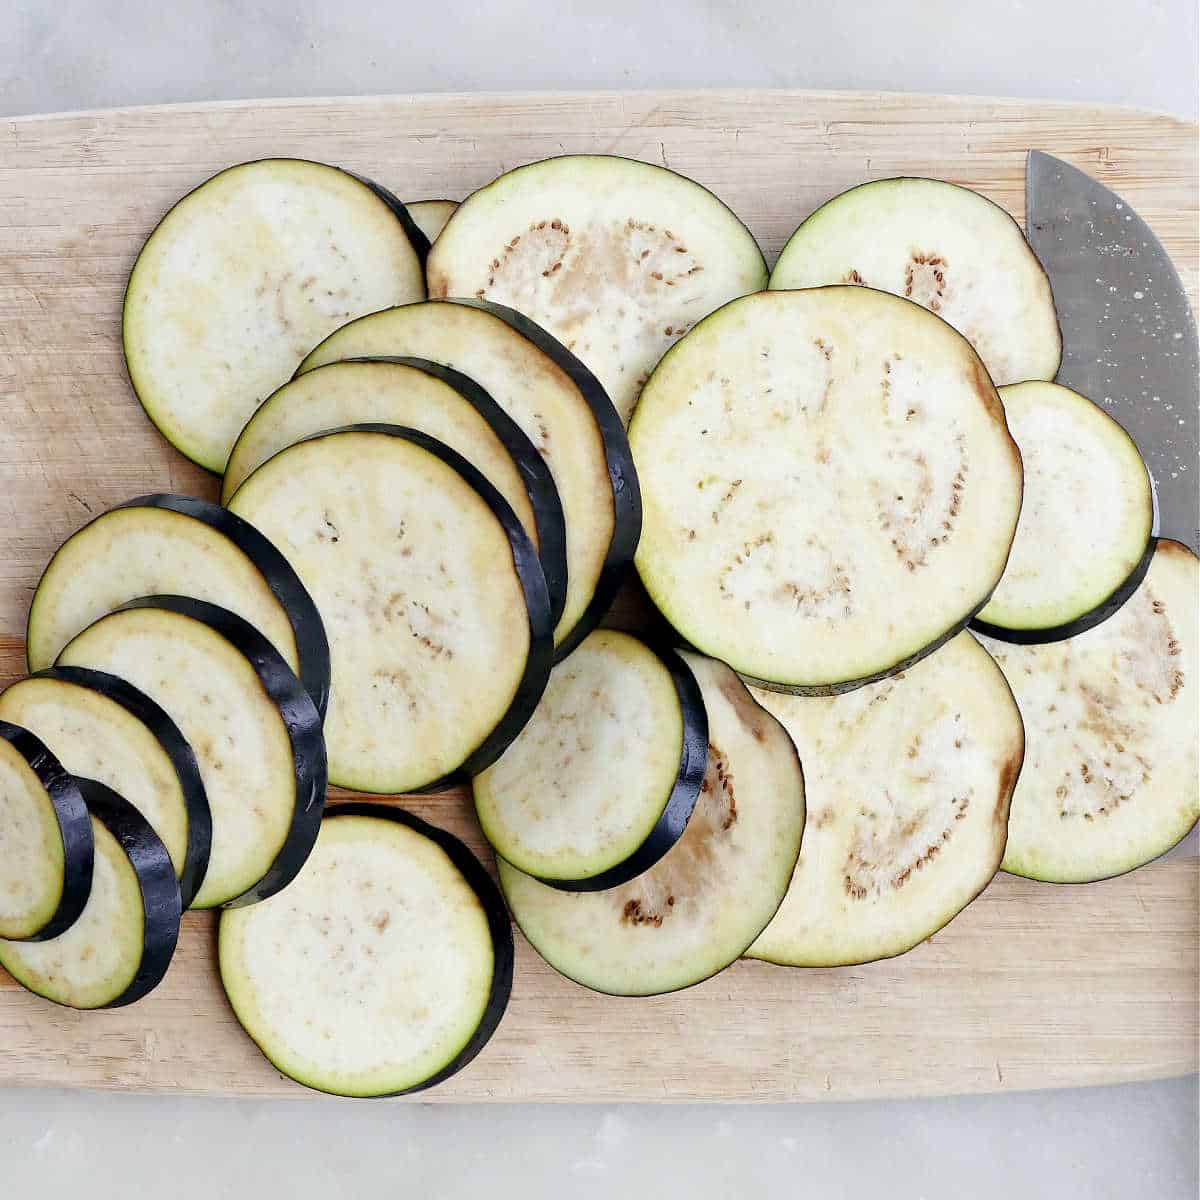 sliced eggplant rounds on a bamboo cutting board next to a knife